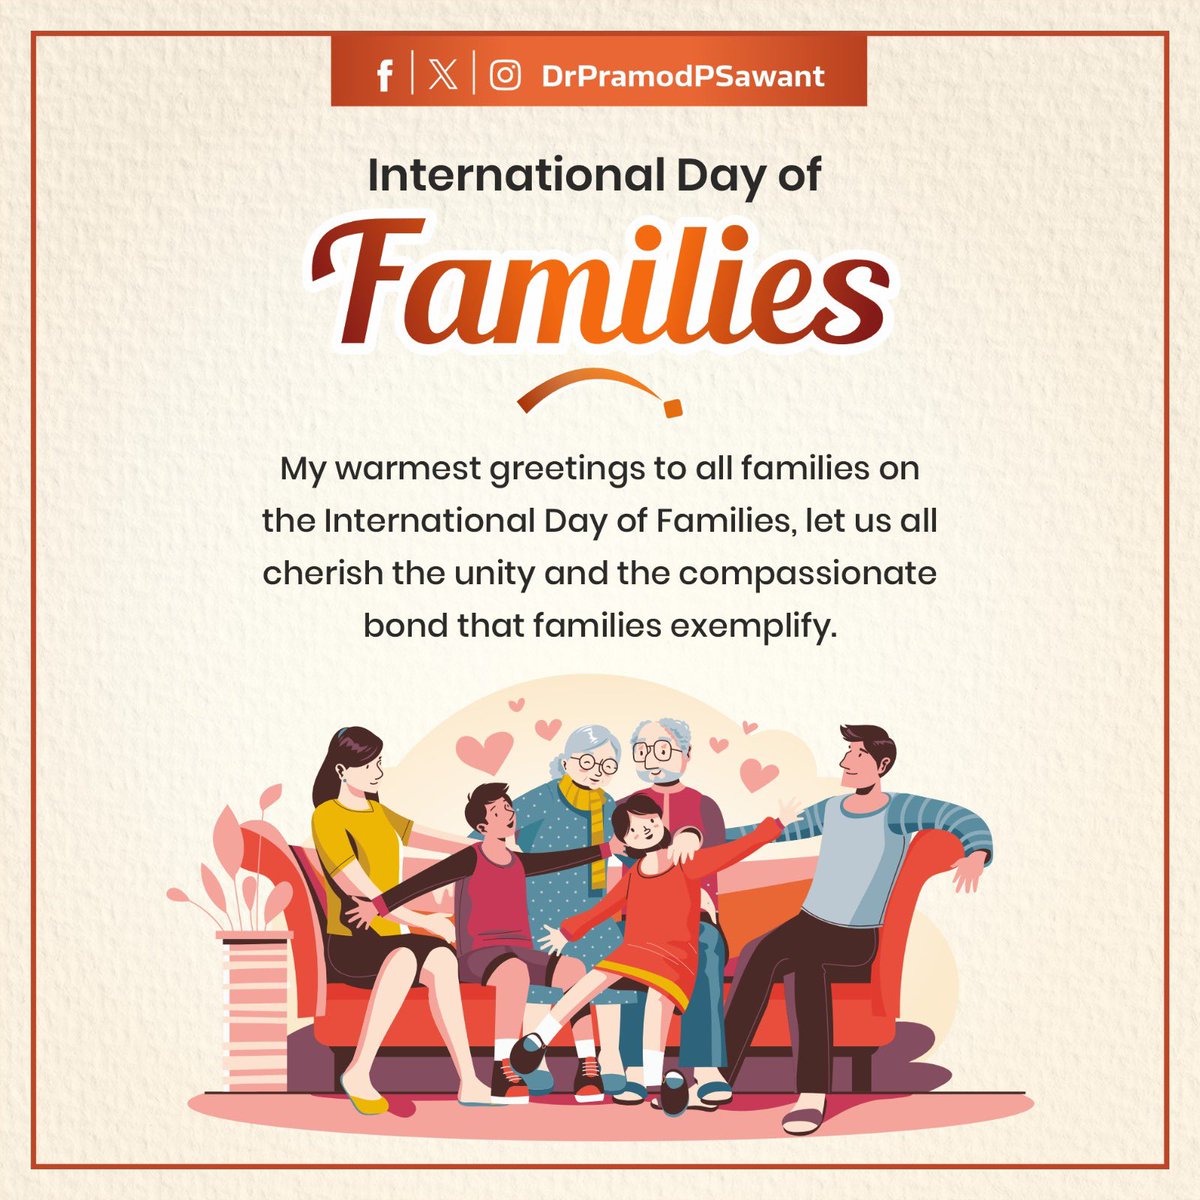 On this #InternationalDayofFamilies, we come together to celebrate the fundamental unit that forms the bedrock of our society; our family. Every family is an essential support system that nurtures values, education and our emotional well-being. My warmest greetings to all